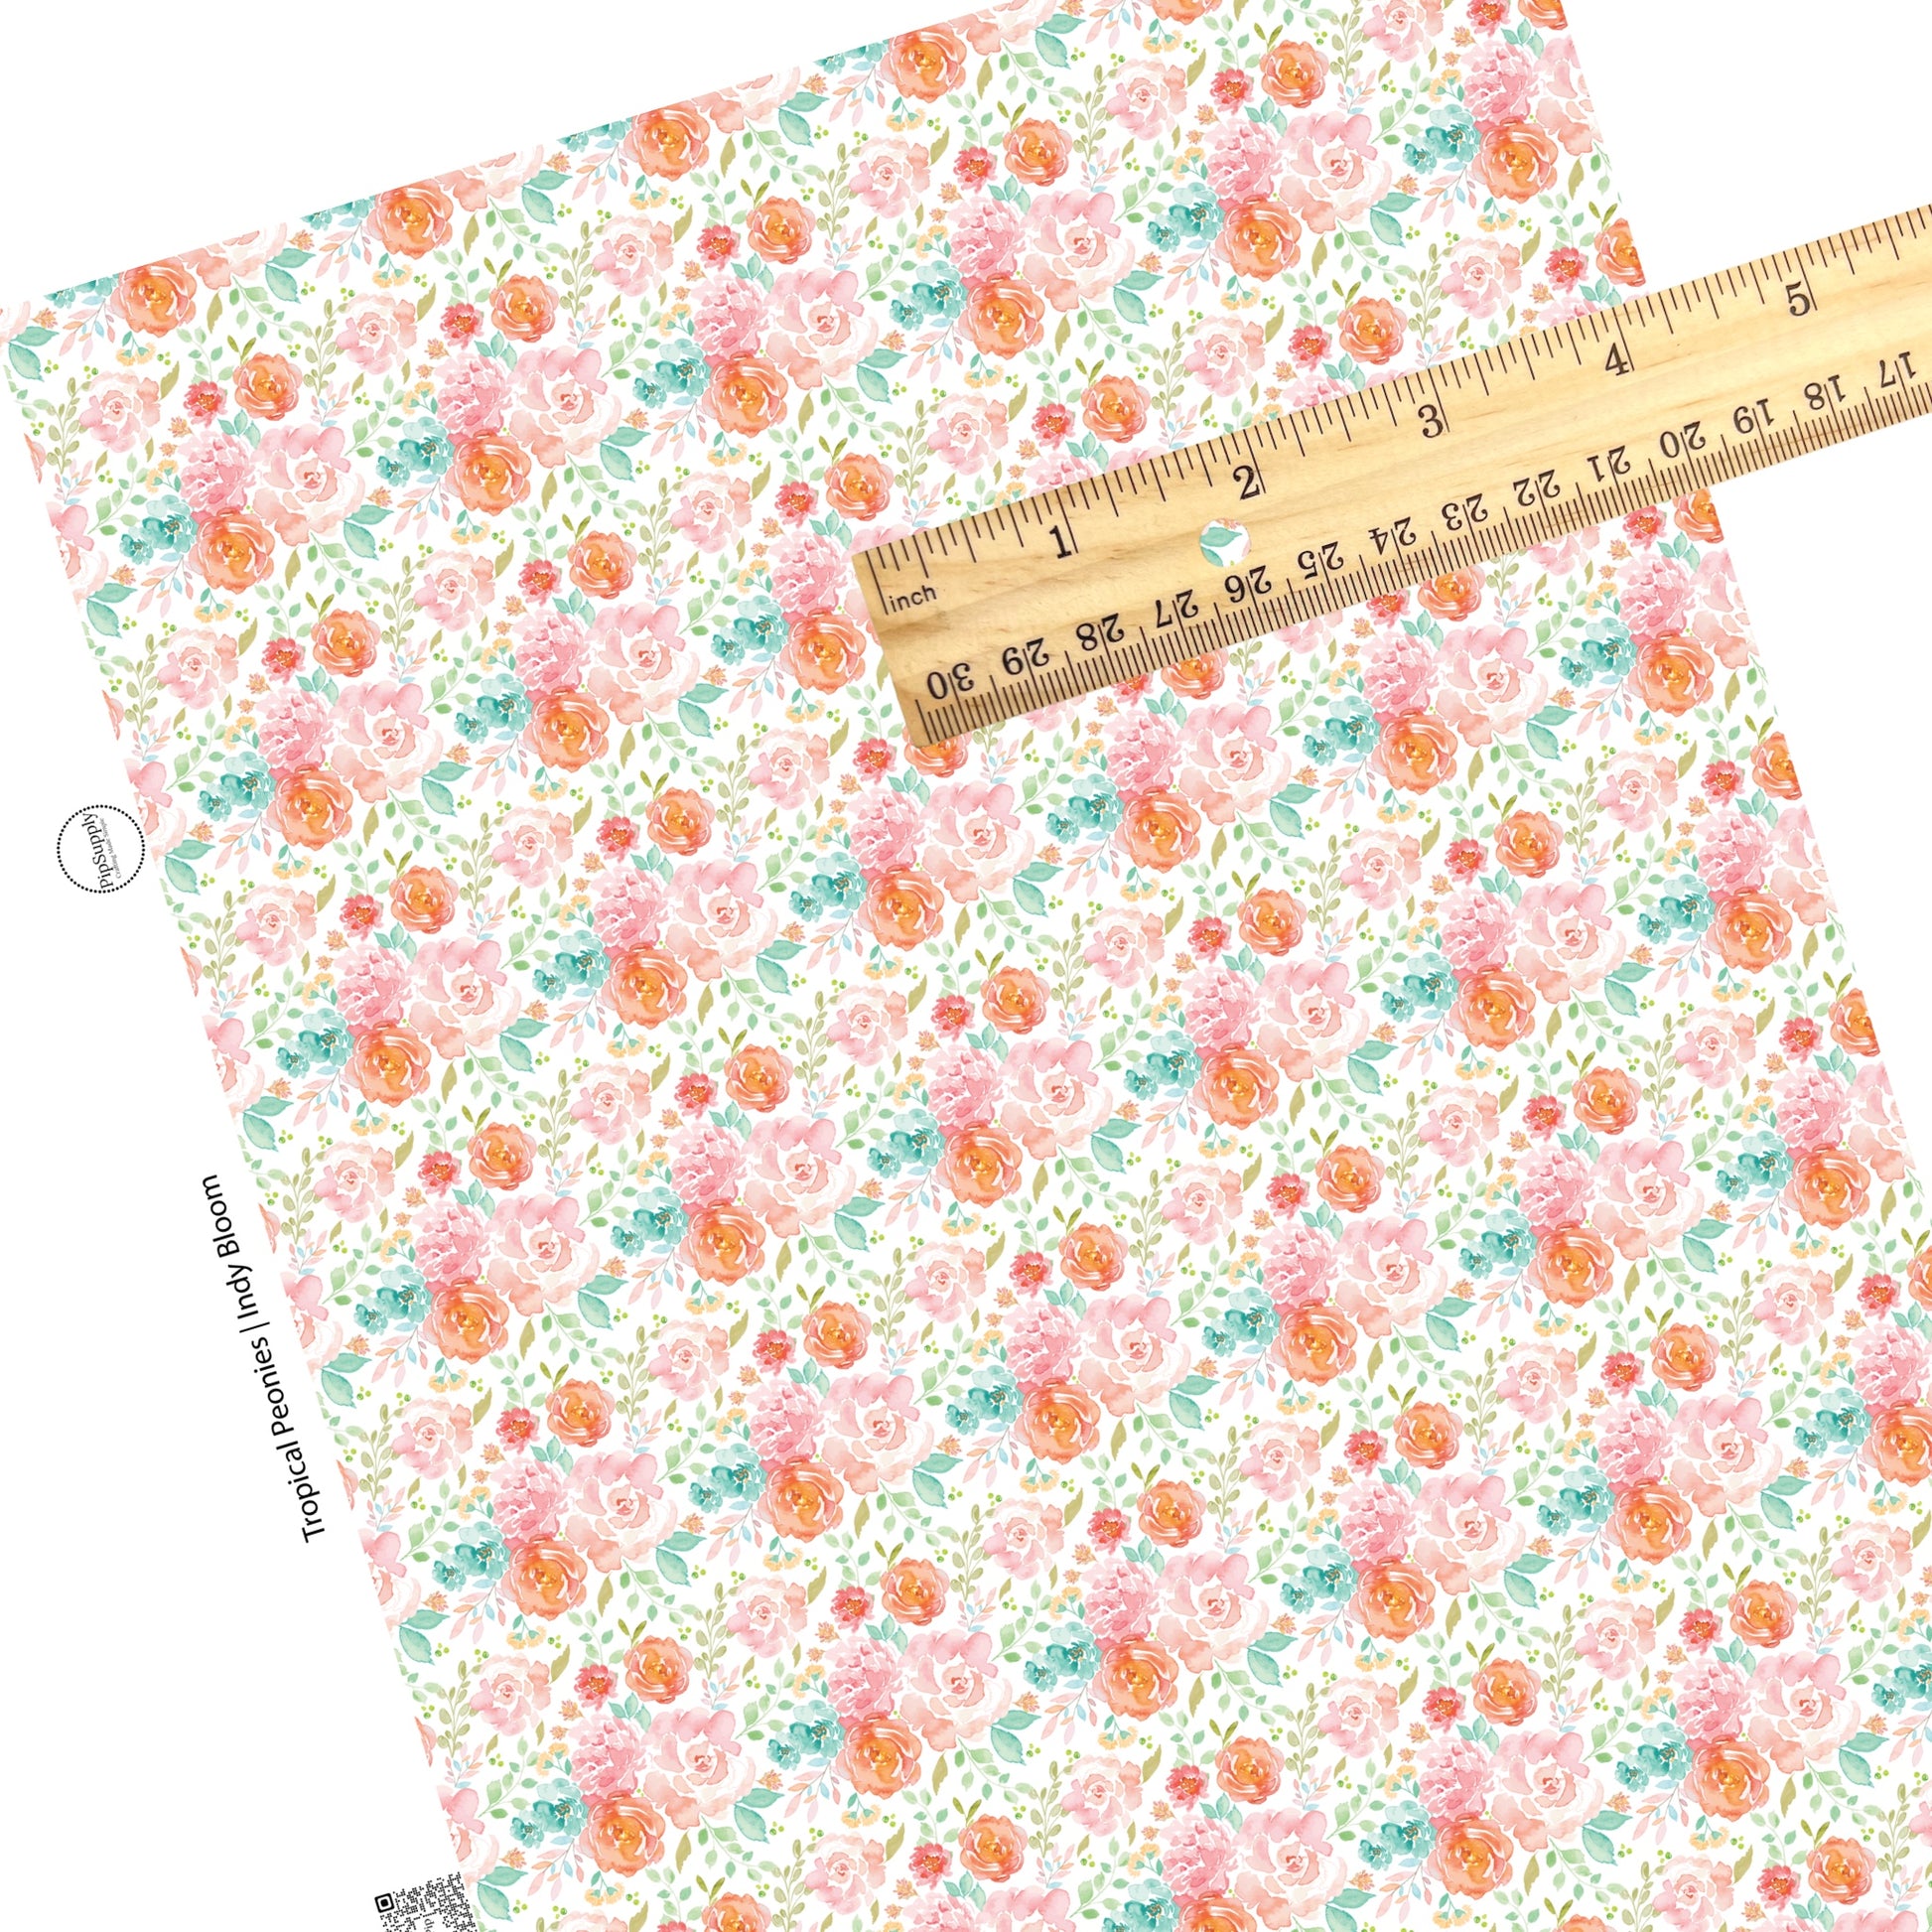 Patches of blue, peach, and pink flowers on white faux leather sheets